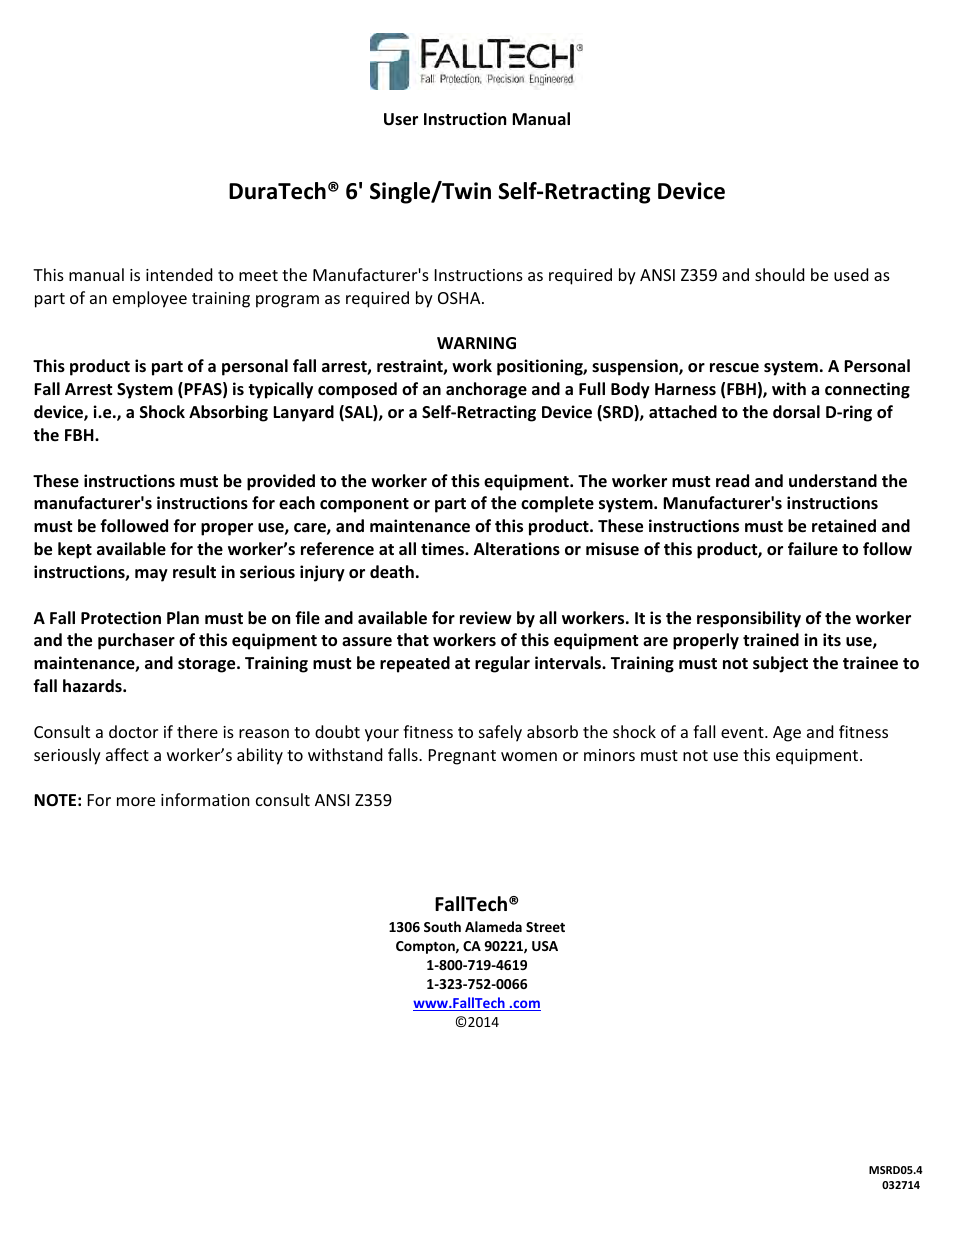 FallTech DuraTech 6' Single/Twin Self‐Retracting Device User Manual | 36 pages